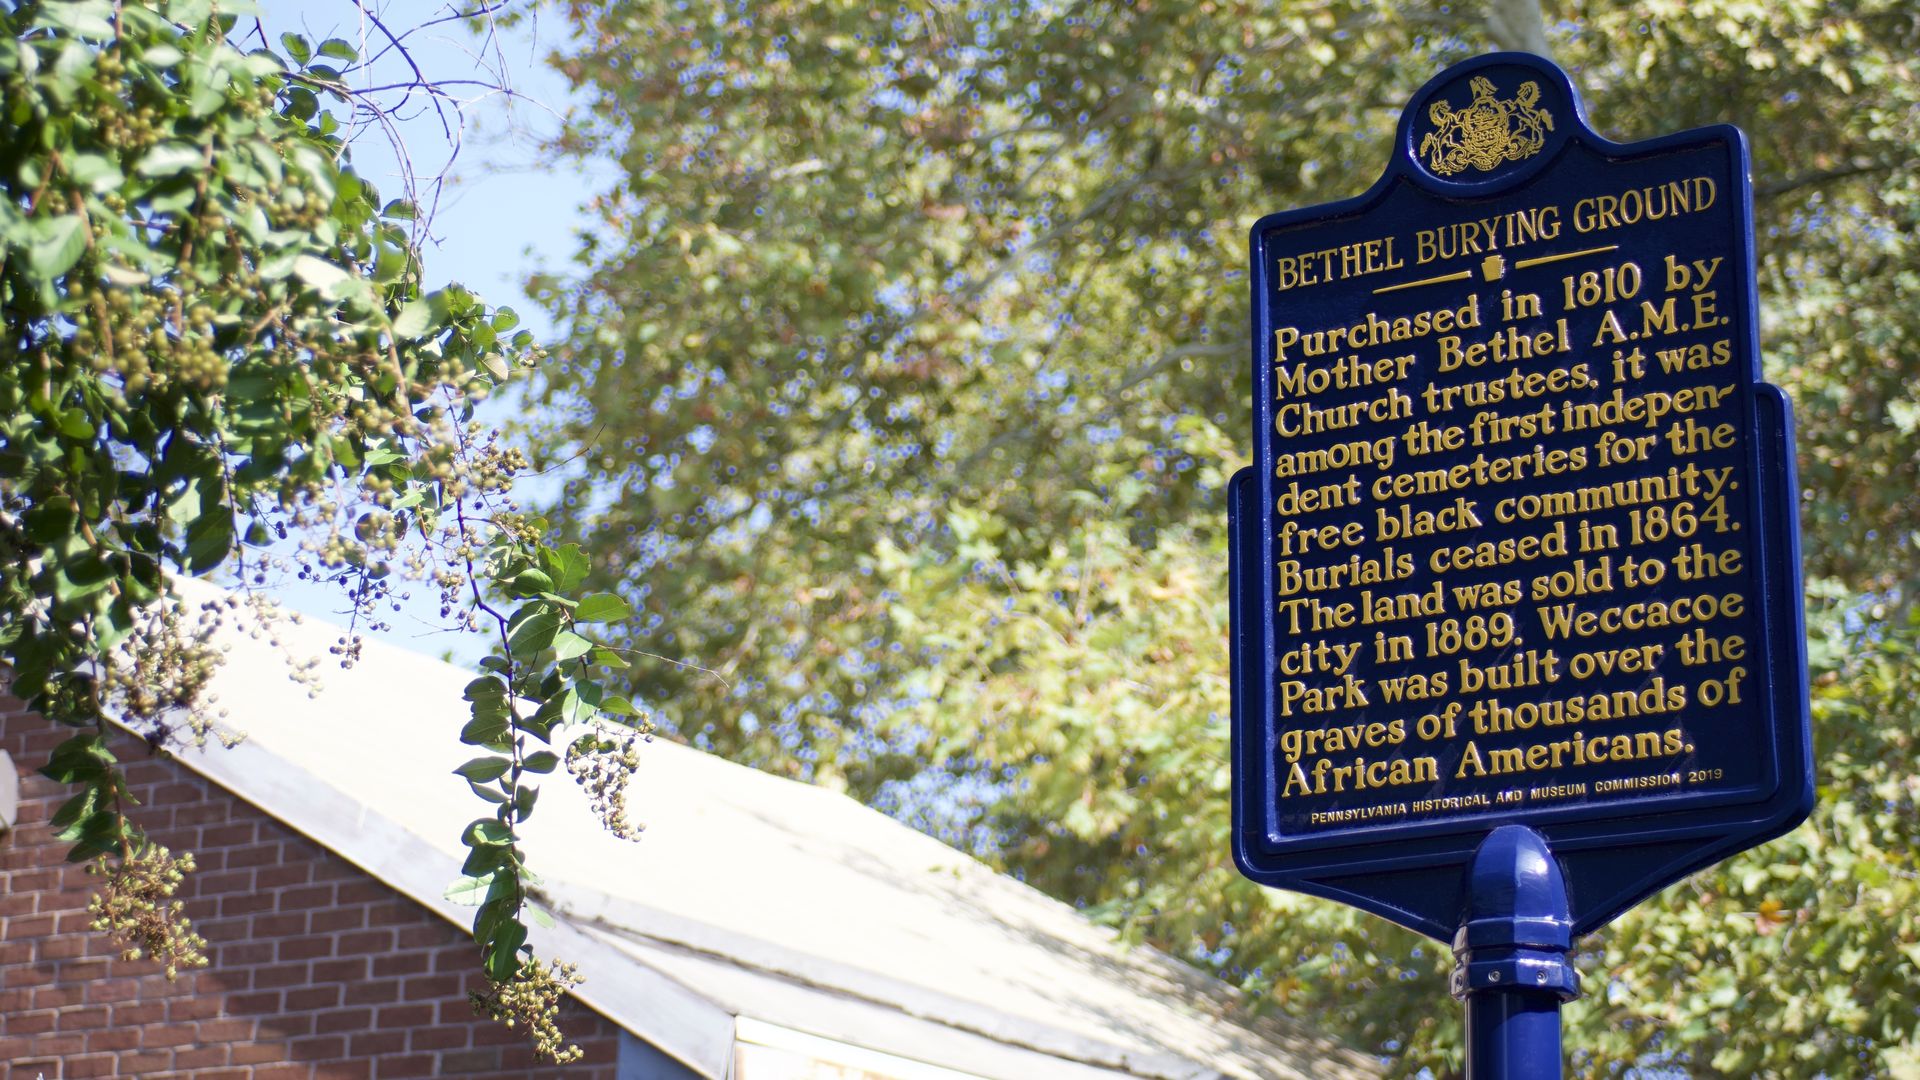 A blue historical marker stands outside the Bethel Burying Grounds in Philadelphia's Queen Village neighborhood.